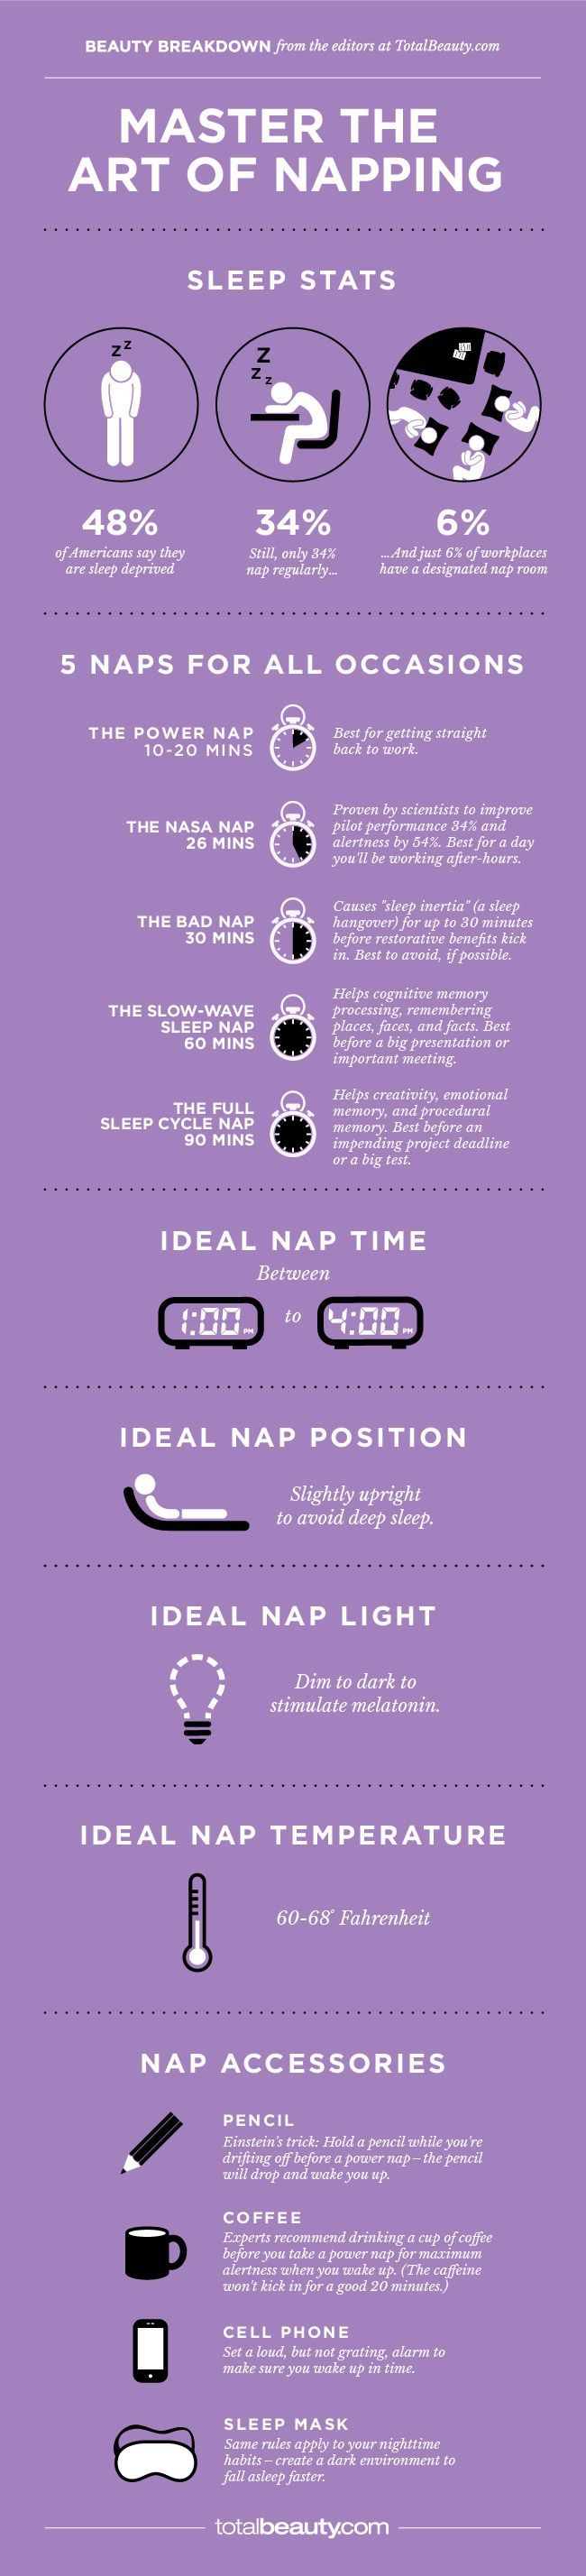 Master the Art of Napping -perfect thing to be thinking of my first day back at work!!